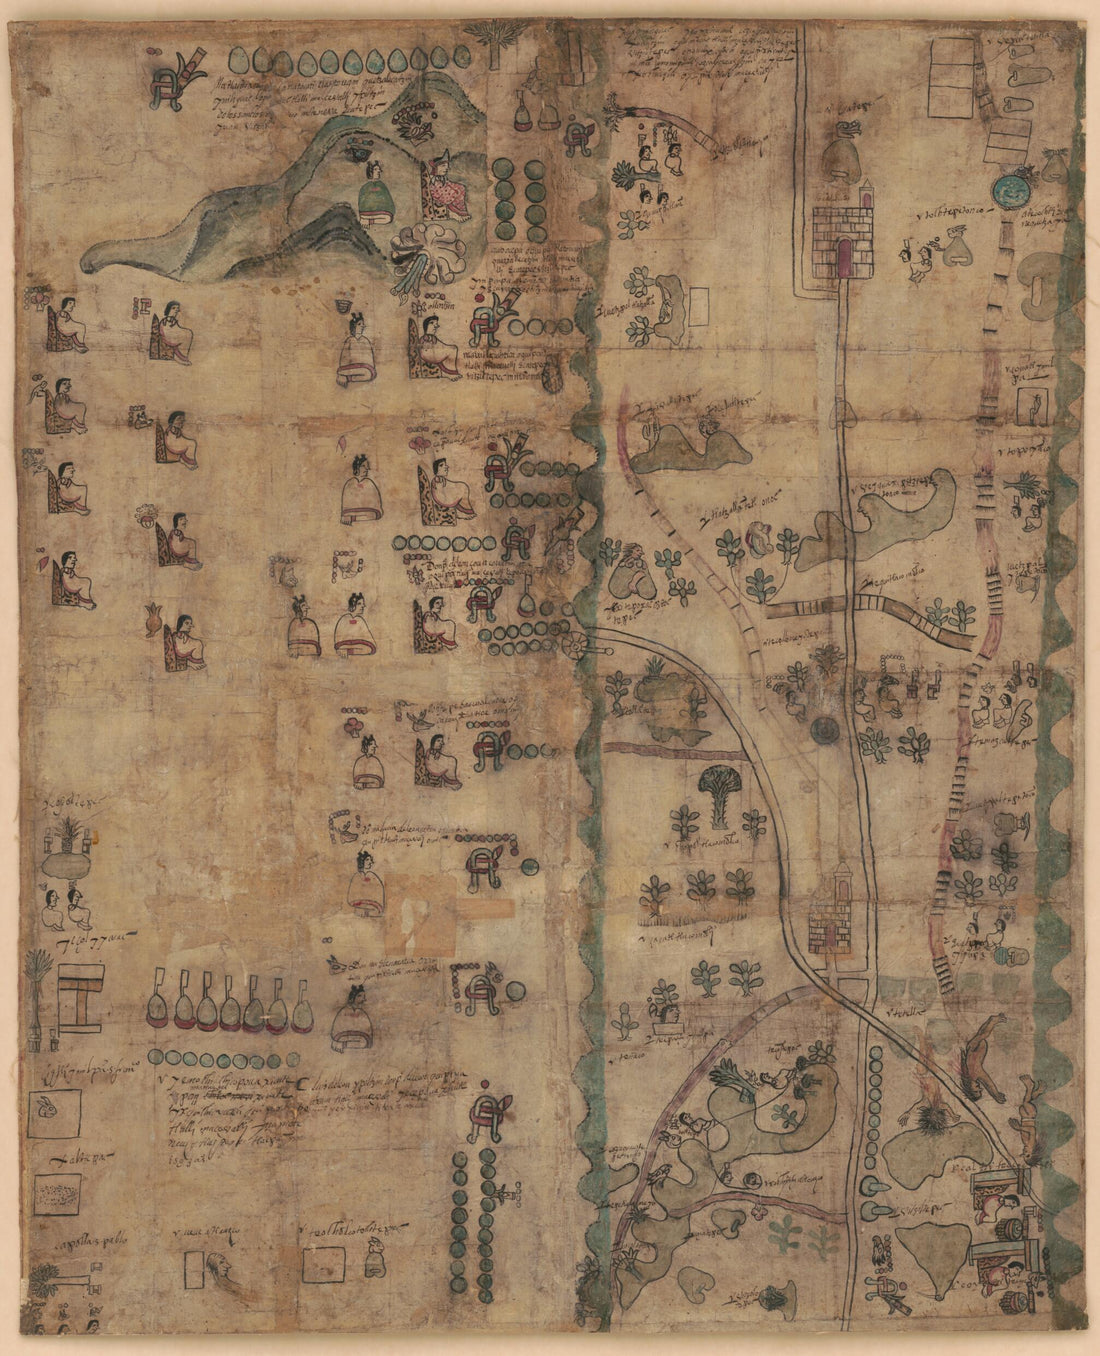 This old map of The Codex Quetzalecatzin (Huitziltepec, Codex Ehecatepec and Huitziltepec, Charles Ratton Codex) from 1593 was created by  in 1593